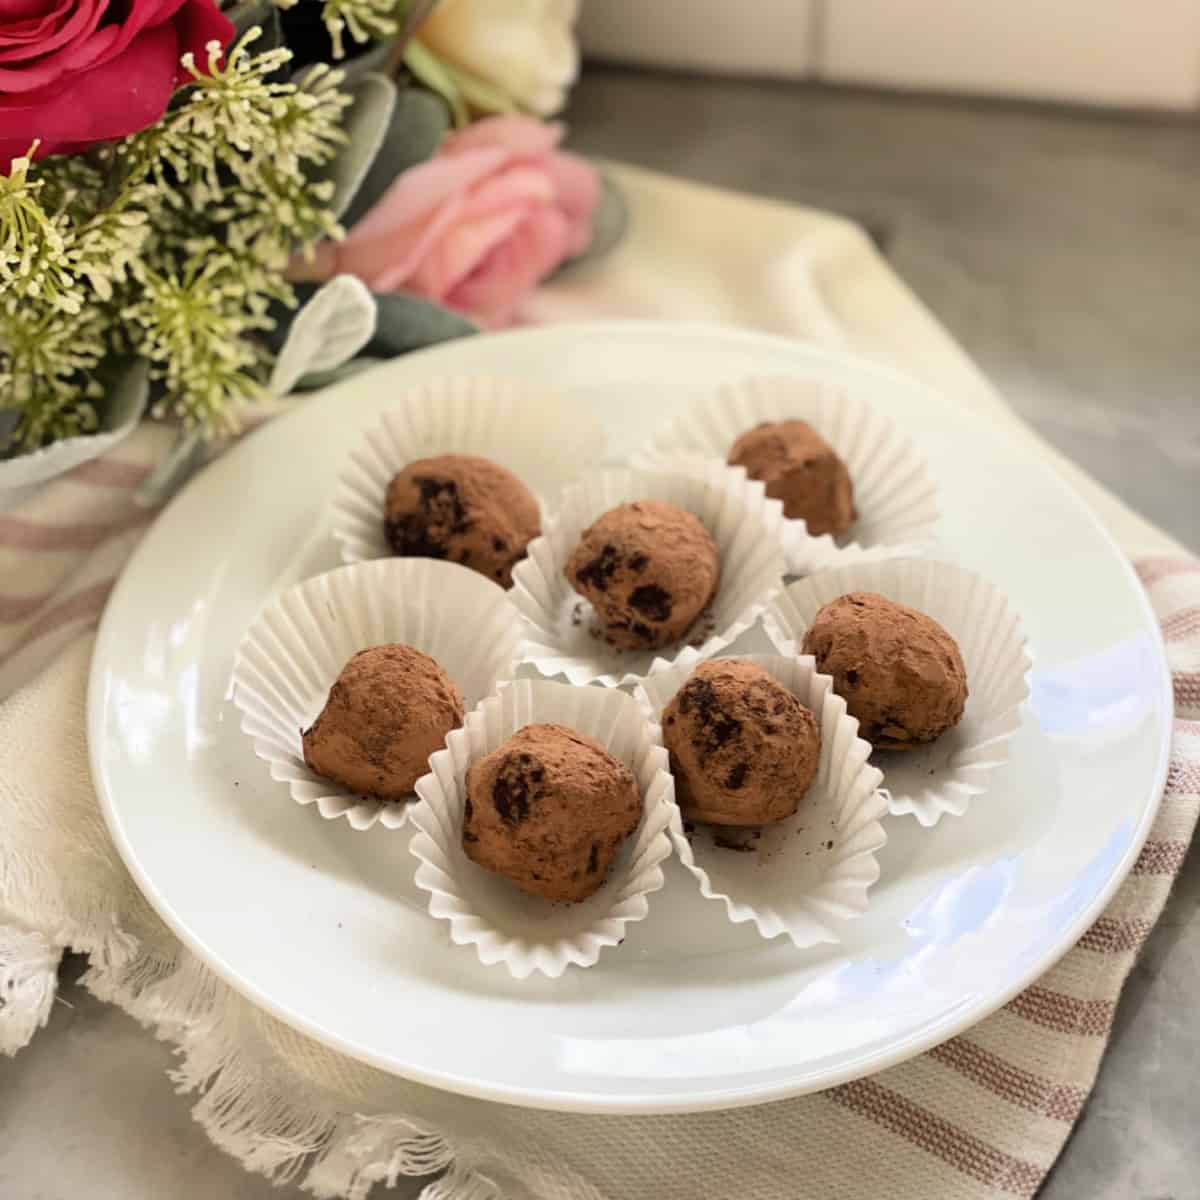 White plate filled with 6 chocolate truffles in white liners.